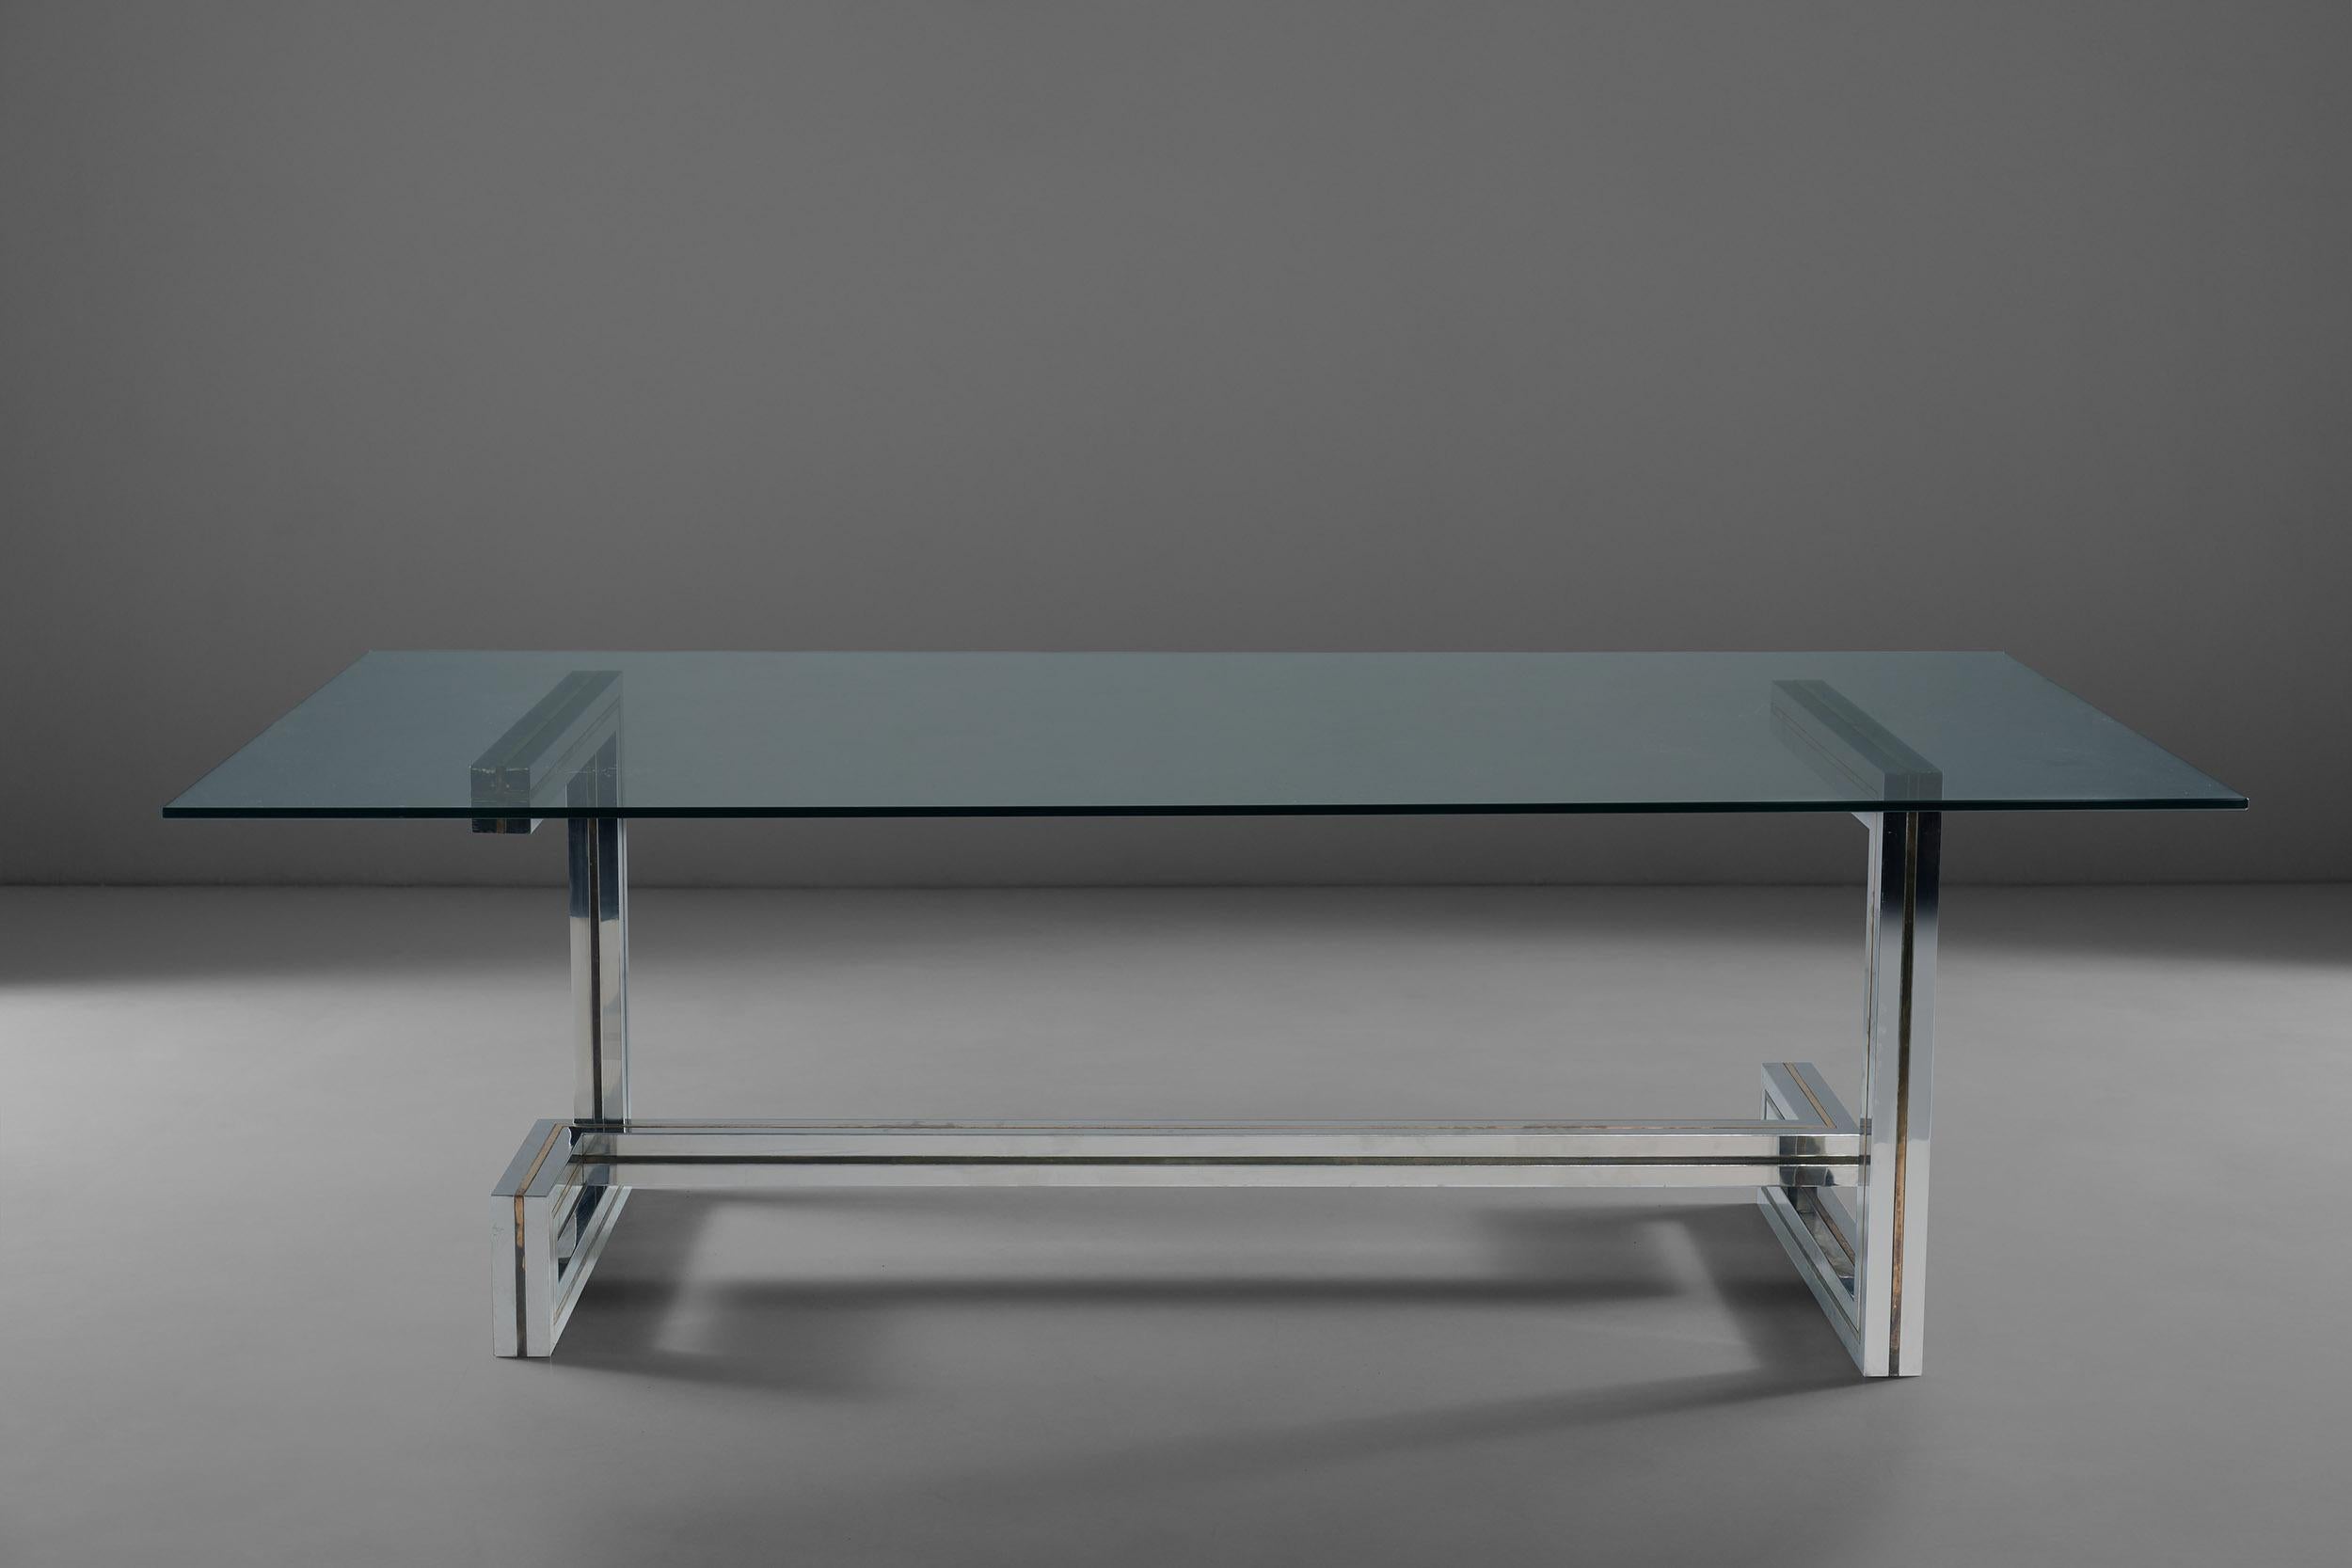 An amazing dining table designed by Romeo Rega made out of steel, brass and glass top. This table's structure plays with geometric lines, creating a clean yet original frame made out of steel and with brass inserts. This combination of material is